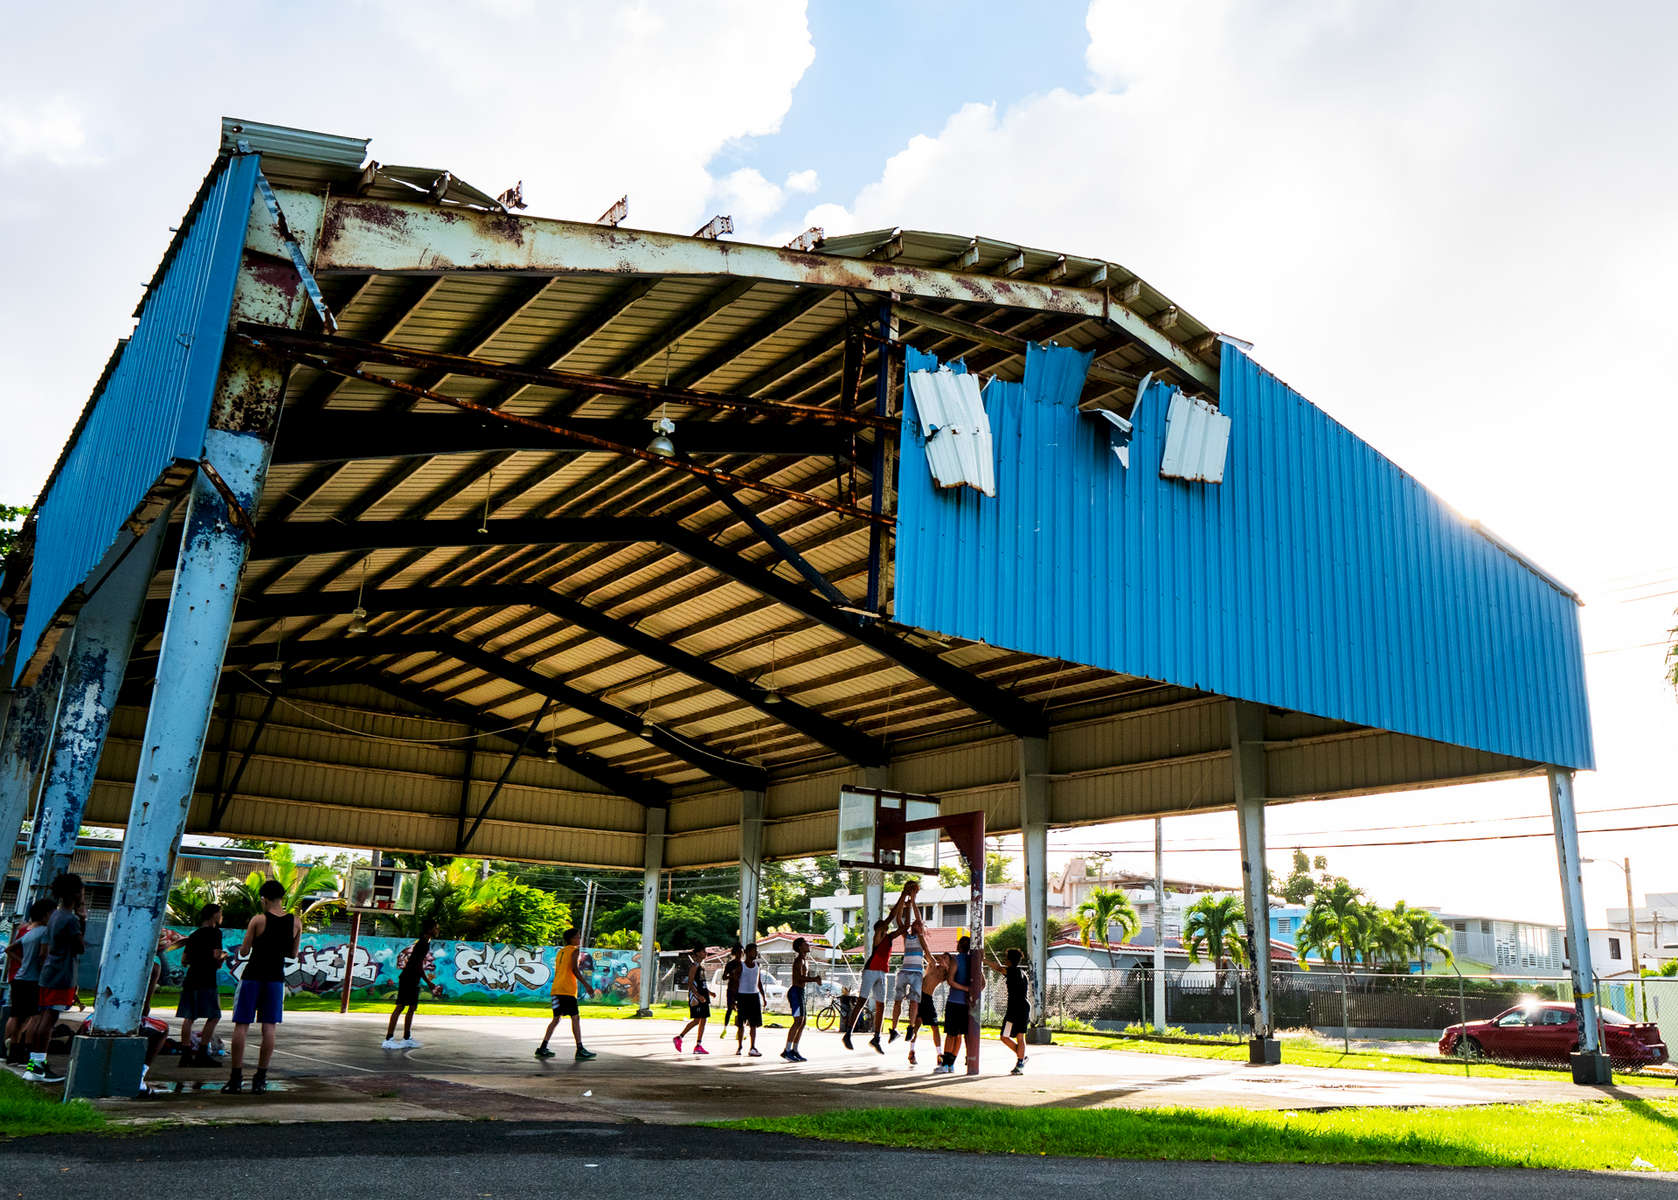 OCEAN PARK, PUERTO RICO - NOVEMBER 12:  People play basketball under a heavily damaged open air roof structure caused by Hurricane Maria at Parque Balboa on November 12, 2018 in Ocean Park, Puerto Rico. The effort continues in Puerto Rico to remain and rebuild more than one year after the Hurricane Maria hit and devastated the island on September 20, 2017. The official number of deaths from the disaster is 2,975.